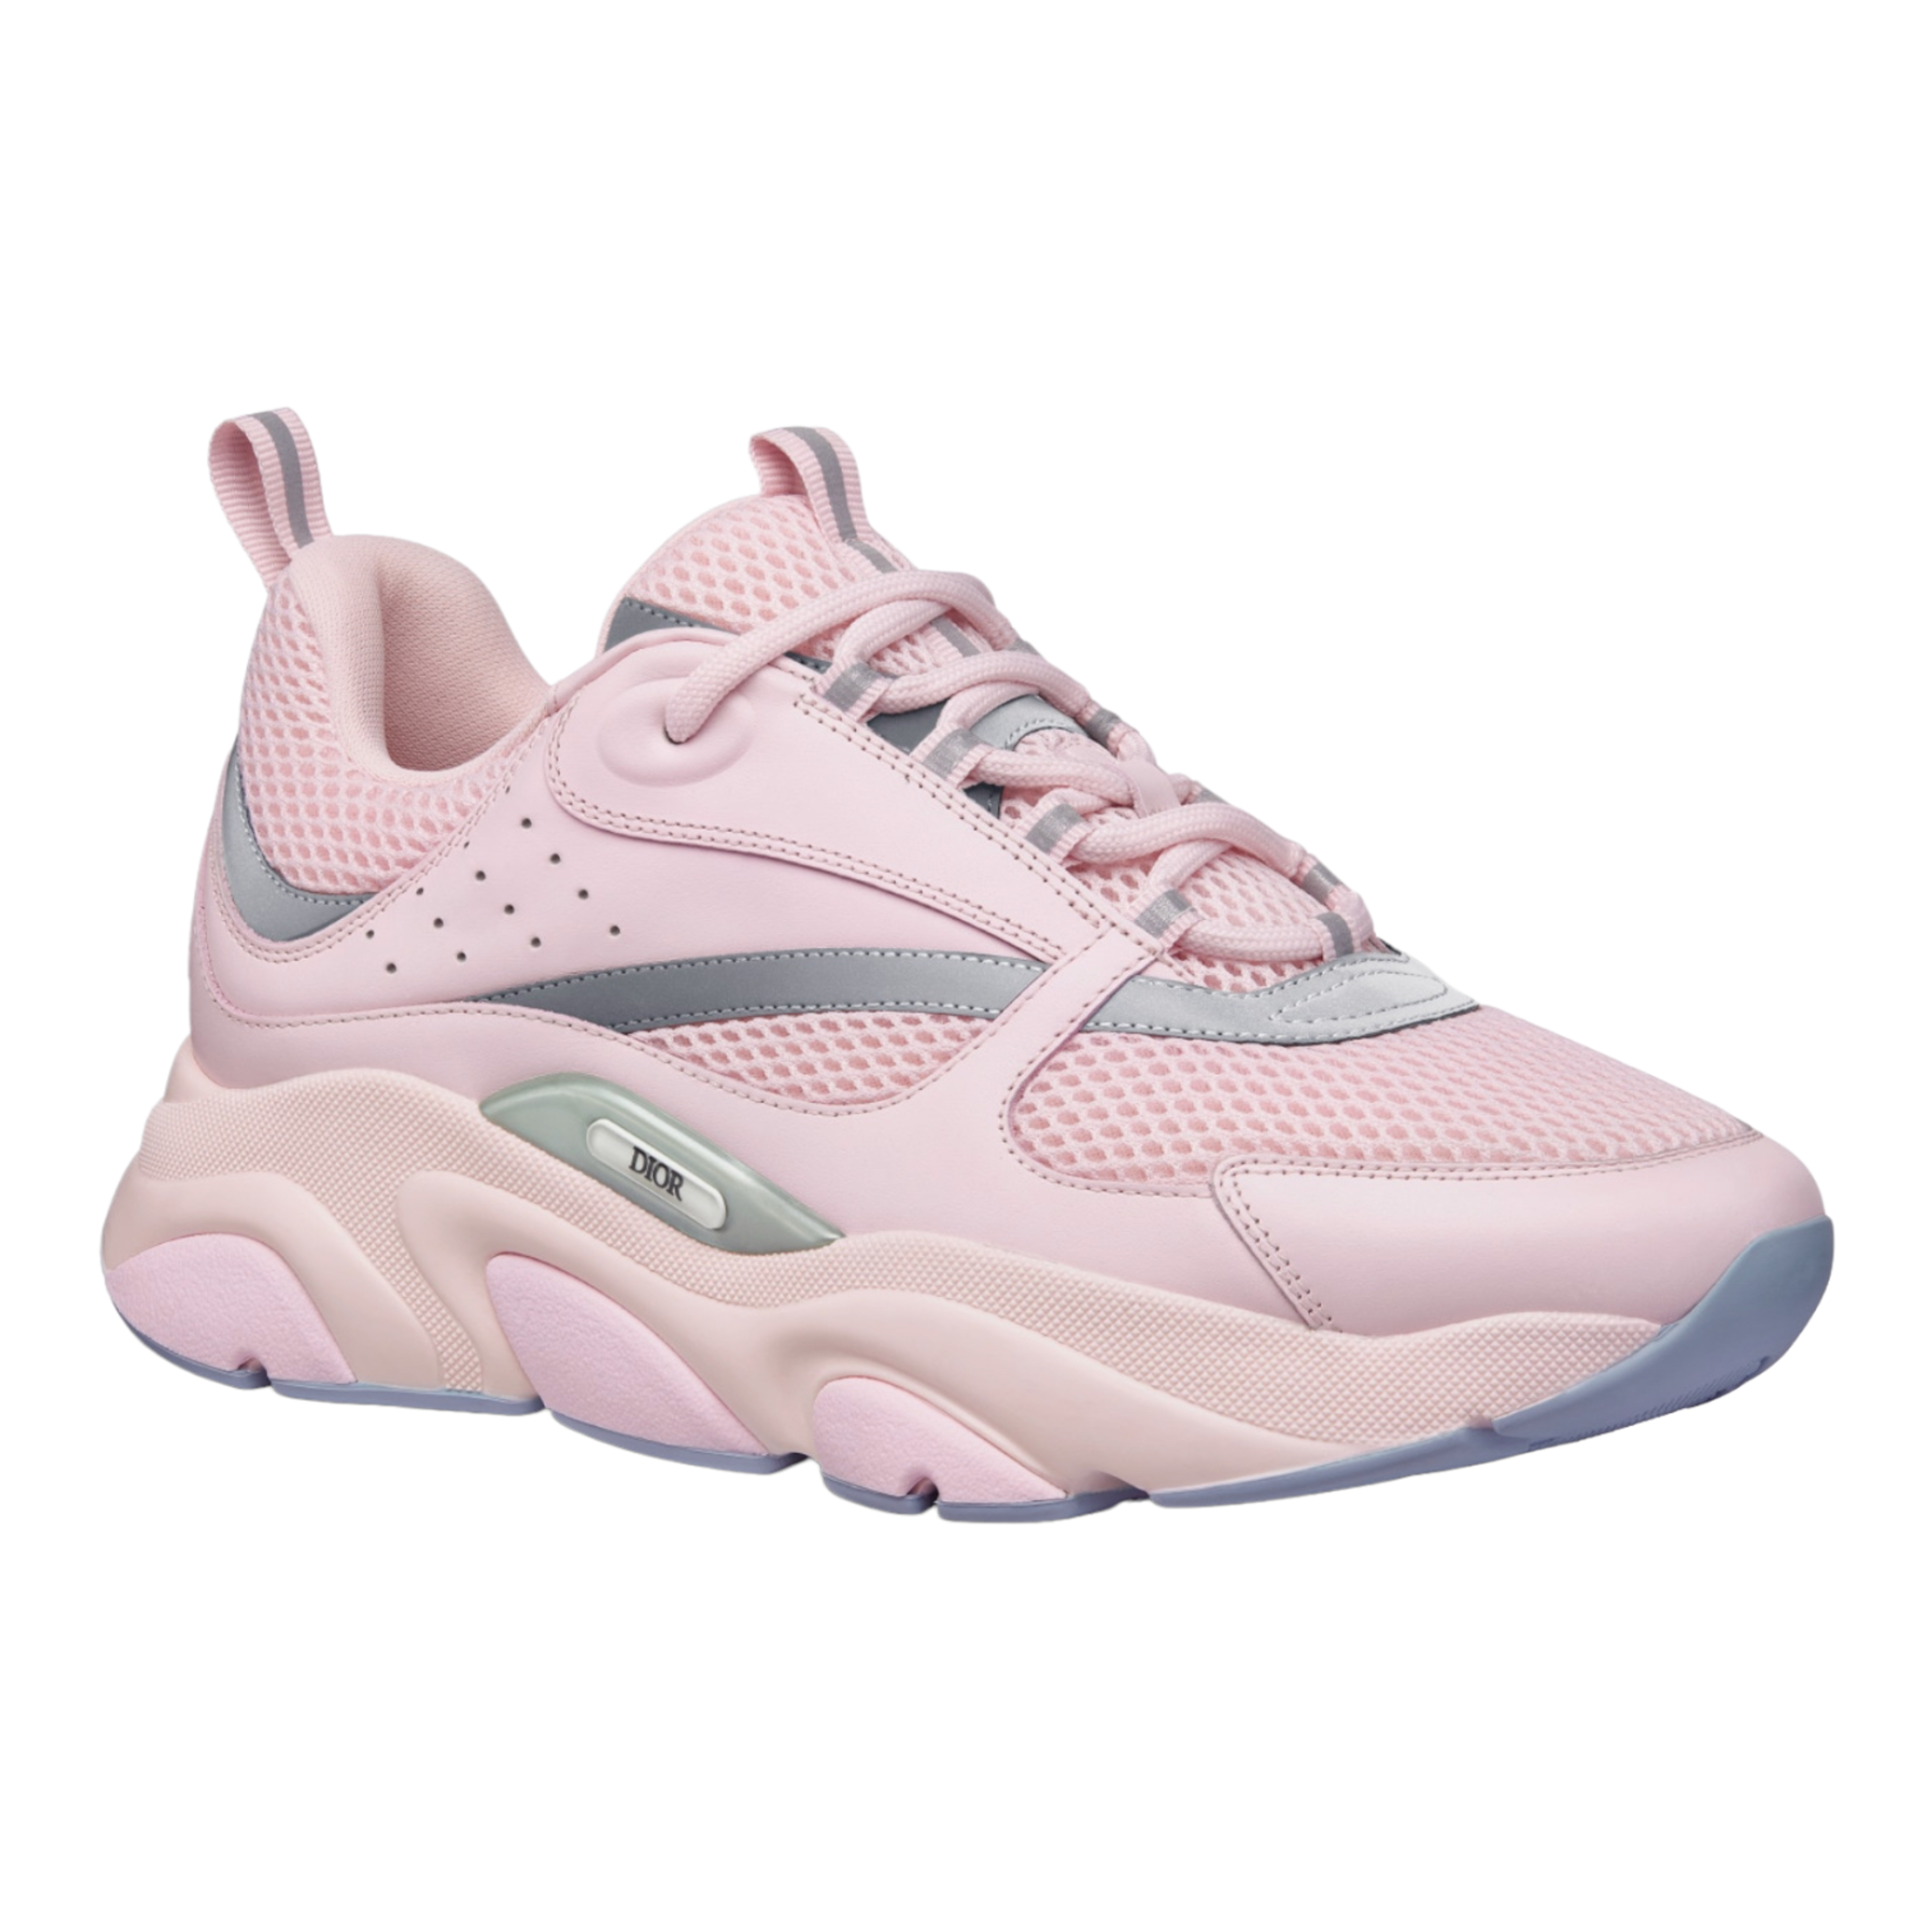 Alternate View 1 of Dior B22 Trainer Pink Silver